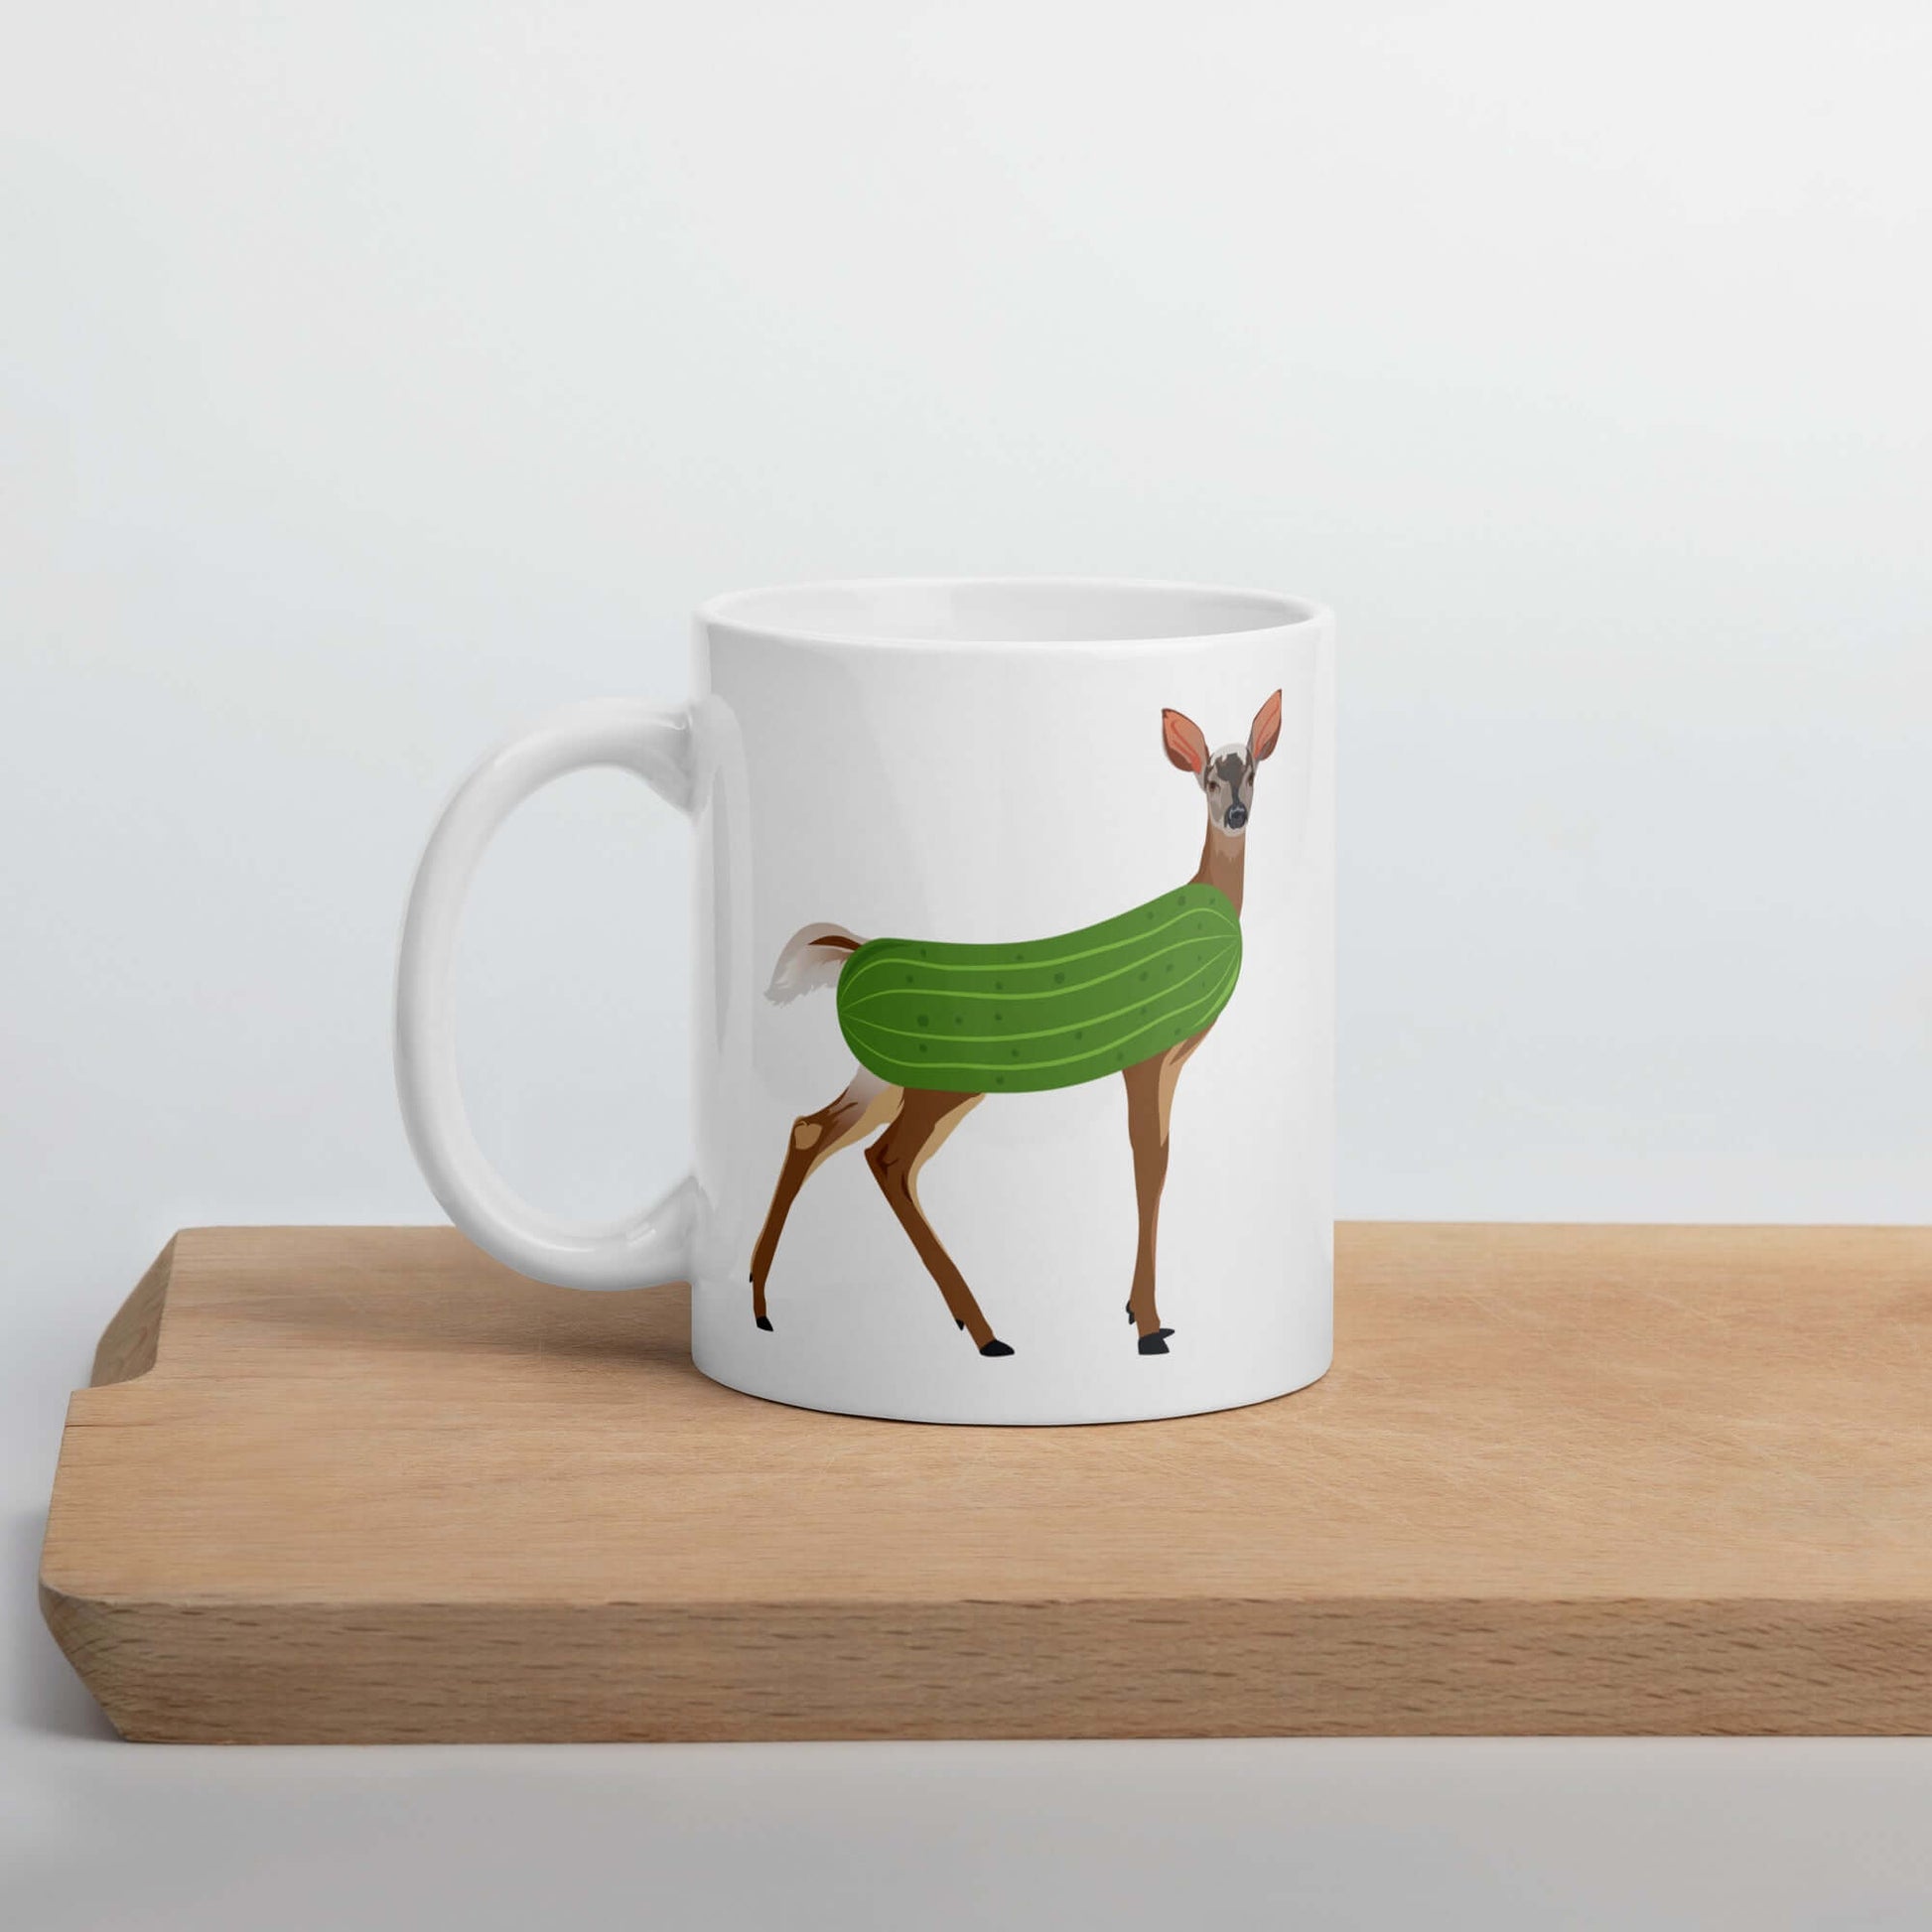 White ceramic dildo pun coffee mug with funny image of a doe deer with a dill pickle body.